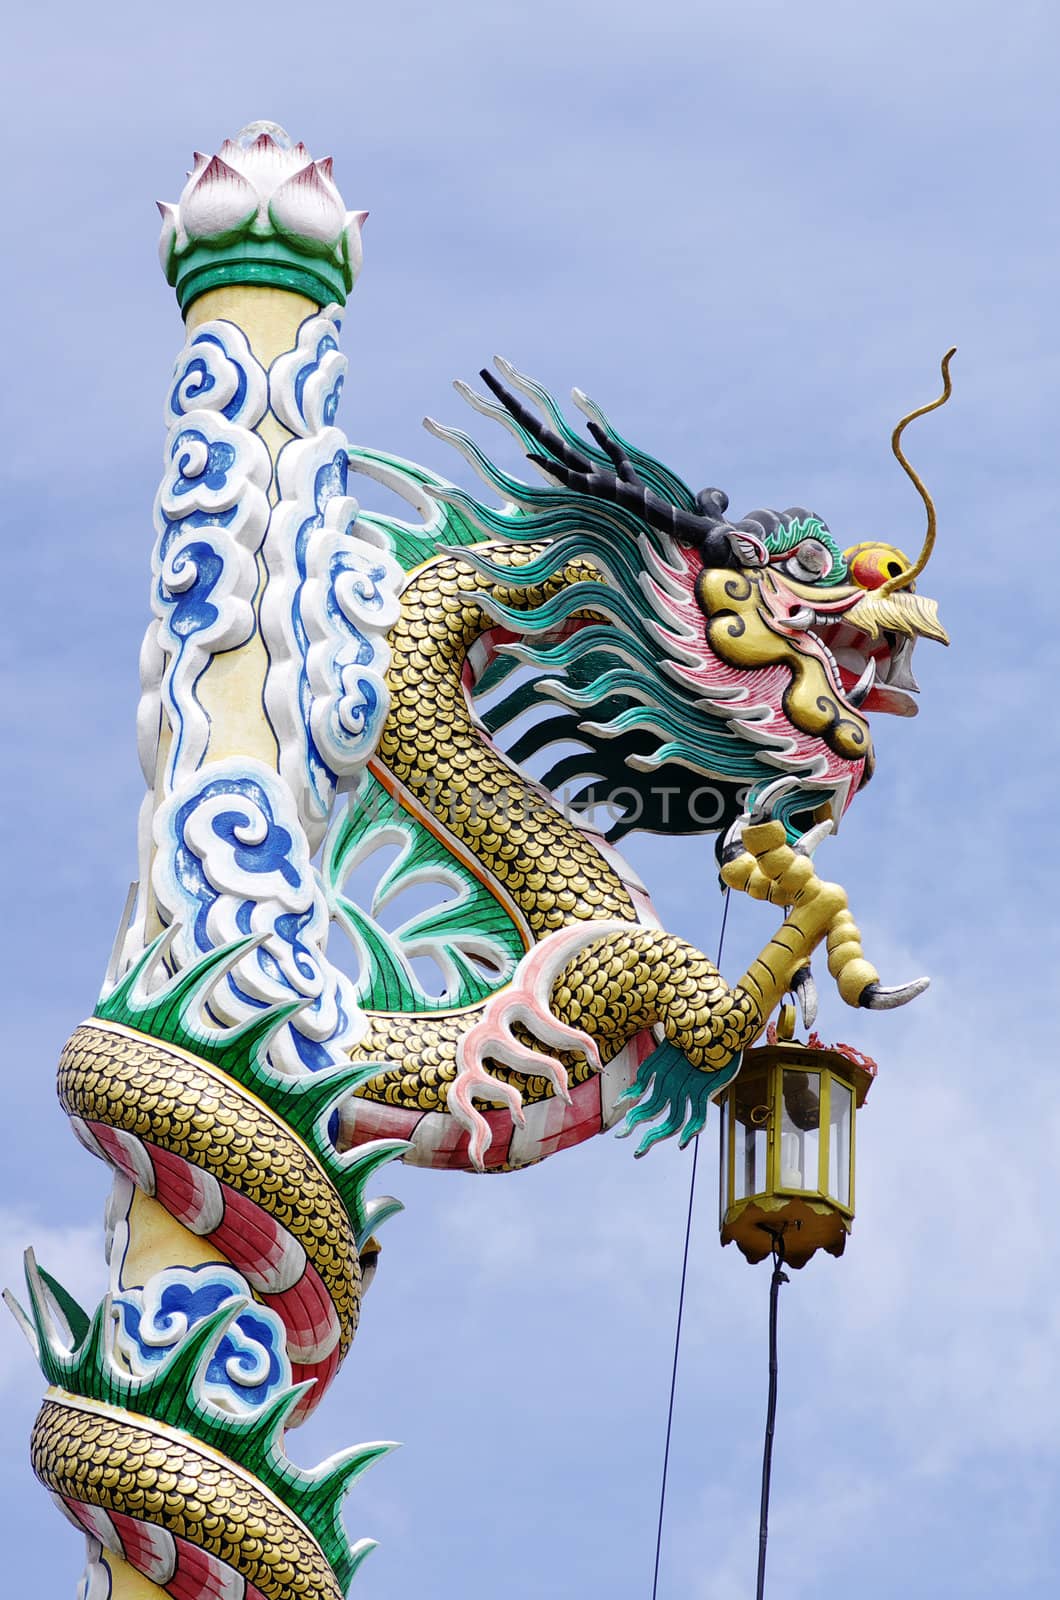 Dragon in chinese temple with blue sky